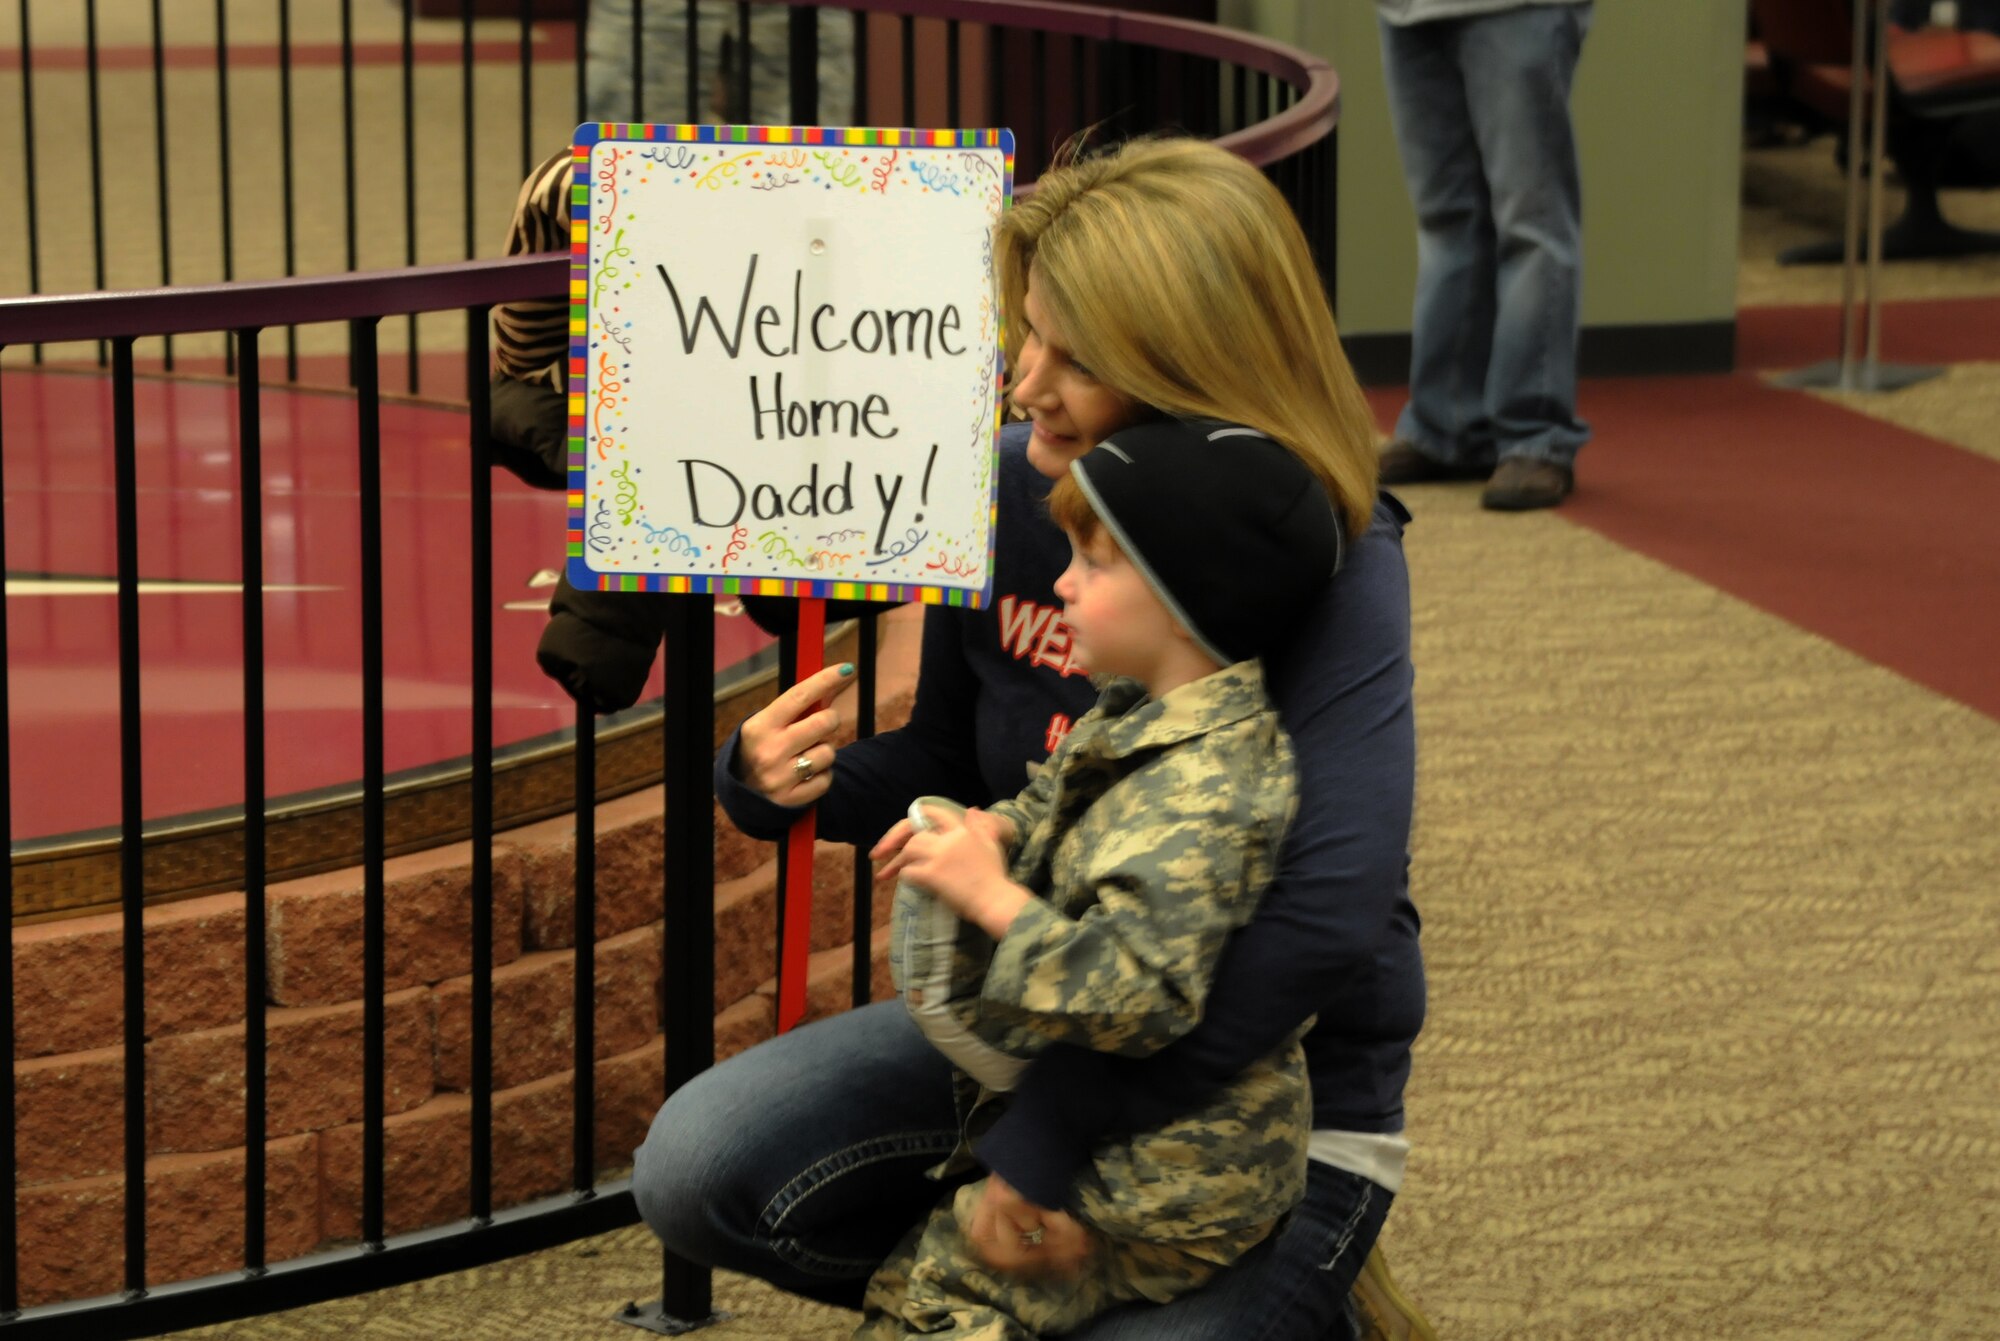 Thirteen Airmen with the 188th Security Forces Squadron returned Nov. 27, 2013, from a six-month deployment to the Middle East just in time to spend Thanksgiving with their families. The Airmen, who left last May, arrived at Fort Smith Regional Airport and were promptly treated to a to hero’s welcome home. Along with a host of family, friends and wing leadership, Maj. Gen. William Wofford, Arkansas National Guard adjutant general, and Brig. Gen. Dwight Balch, Arkansas Air National Guard commander, were on hand to welcome back the returning Airmen. (U.S. Air National Guard photo by Maj. Heath Allen/188th Fighter Wing)